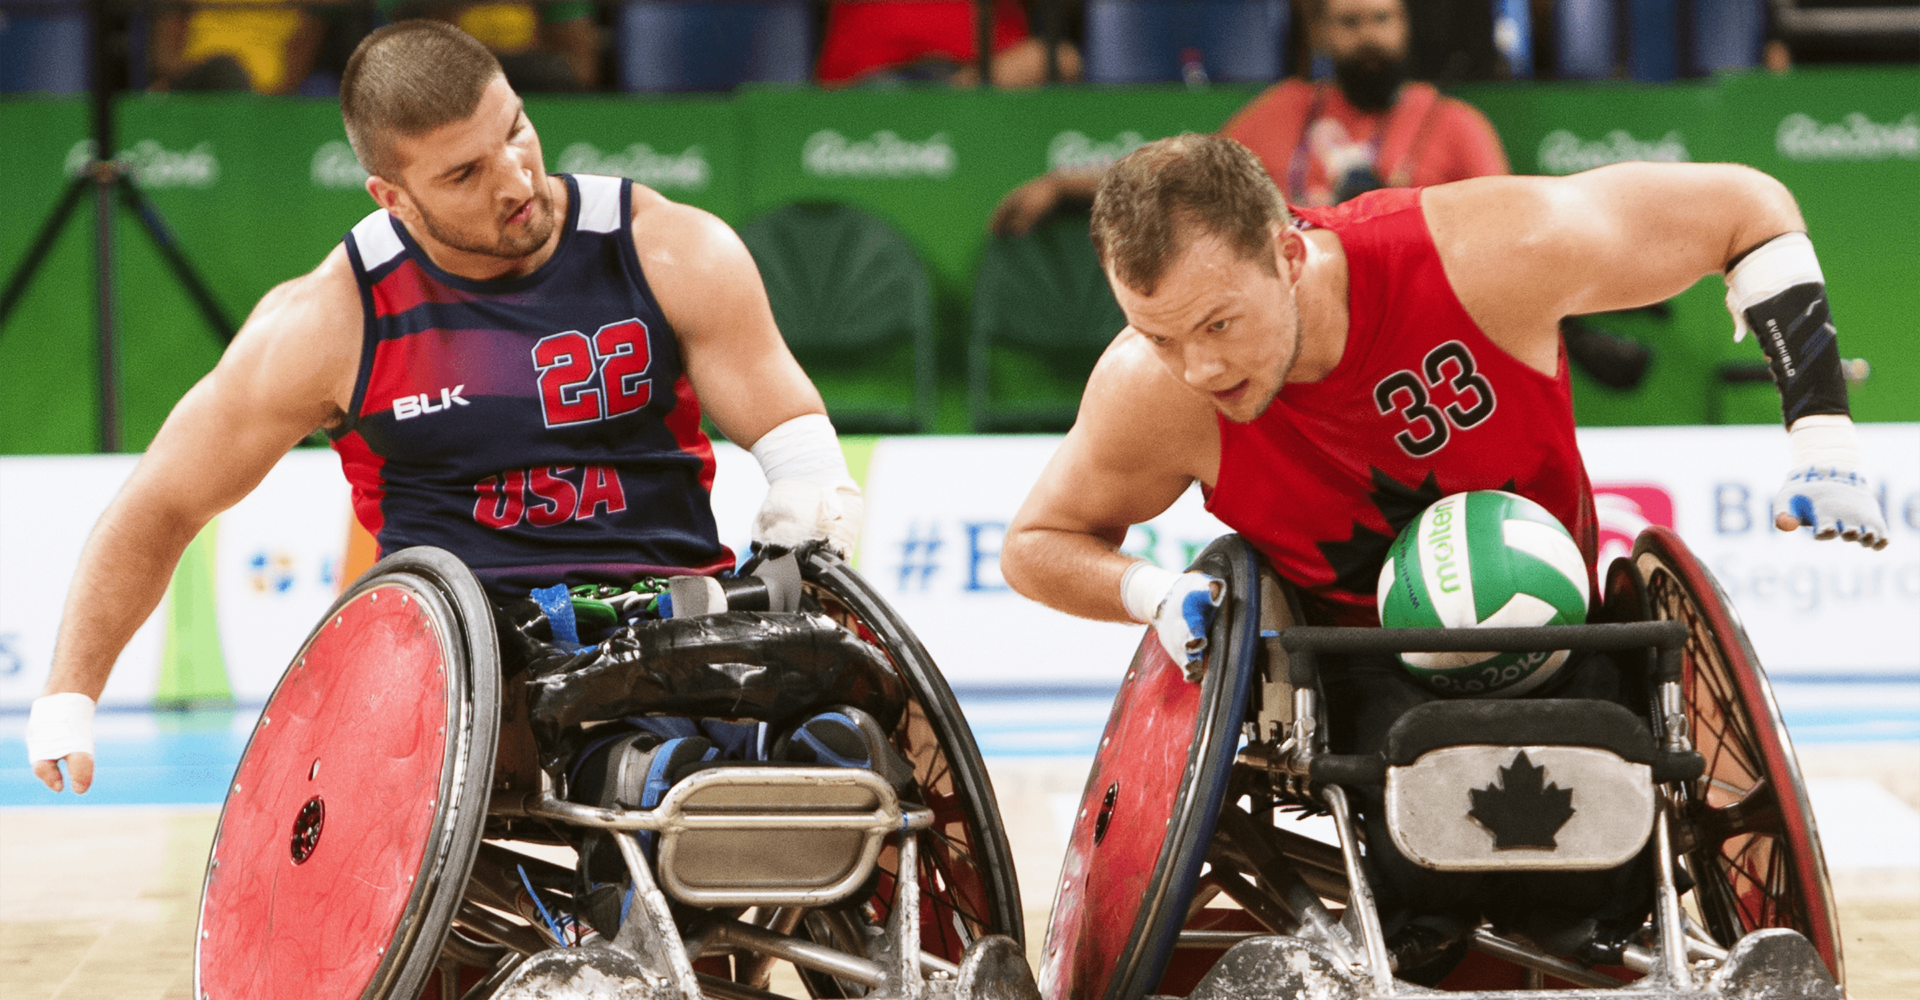 PREVIEWING LIMA 2019: TOKYO 2020 BERTH ON THE LINE IN WHEELCHAIR RUGBY AT PARAPAN AM GAMES